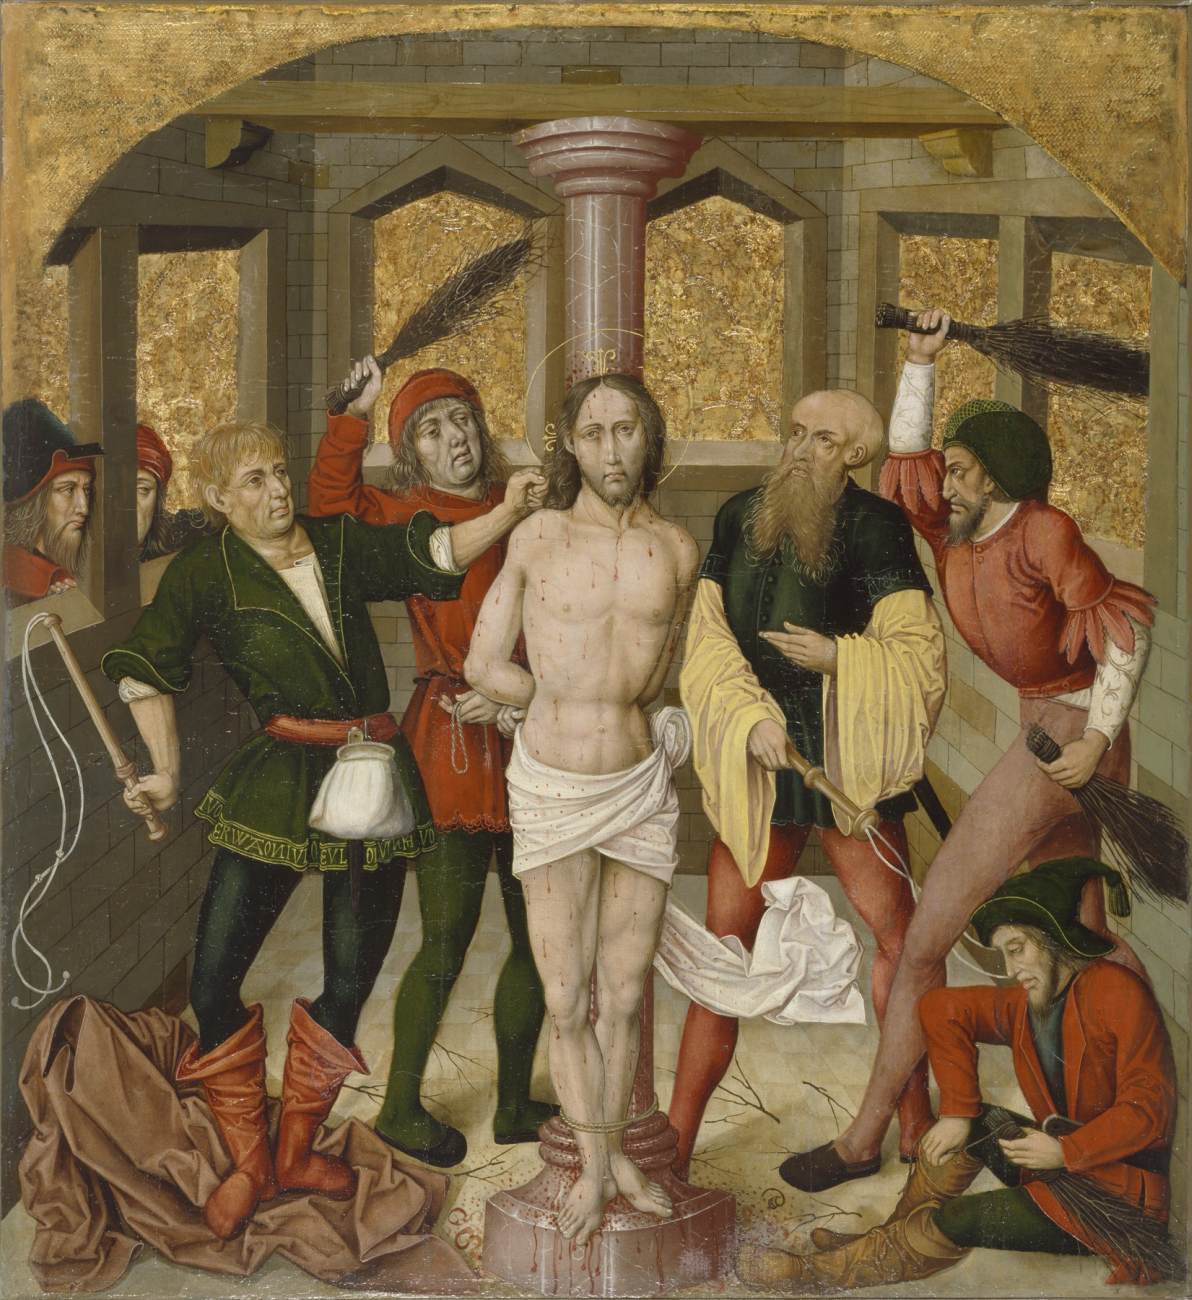 Altarpiece with The Passion of Christ: The Flagellation